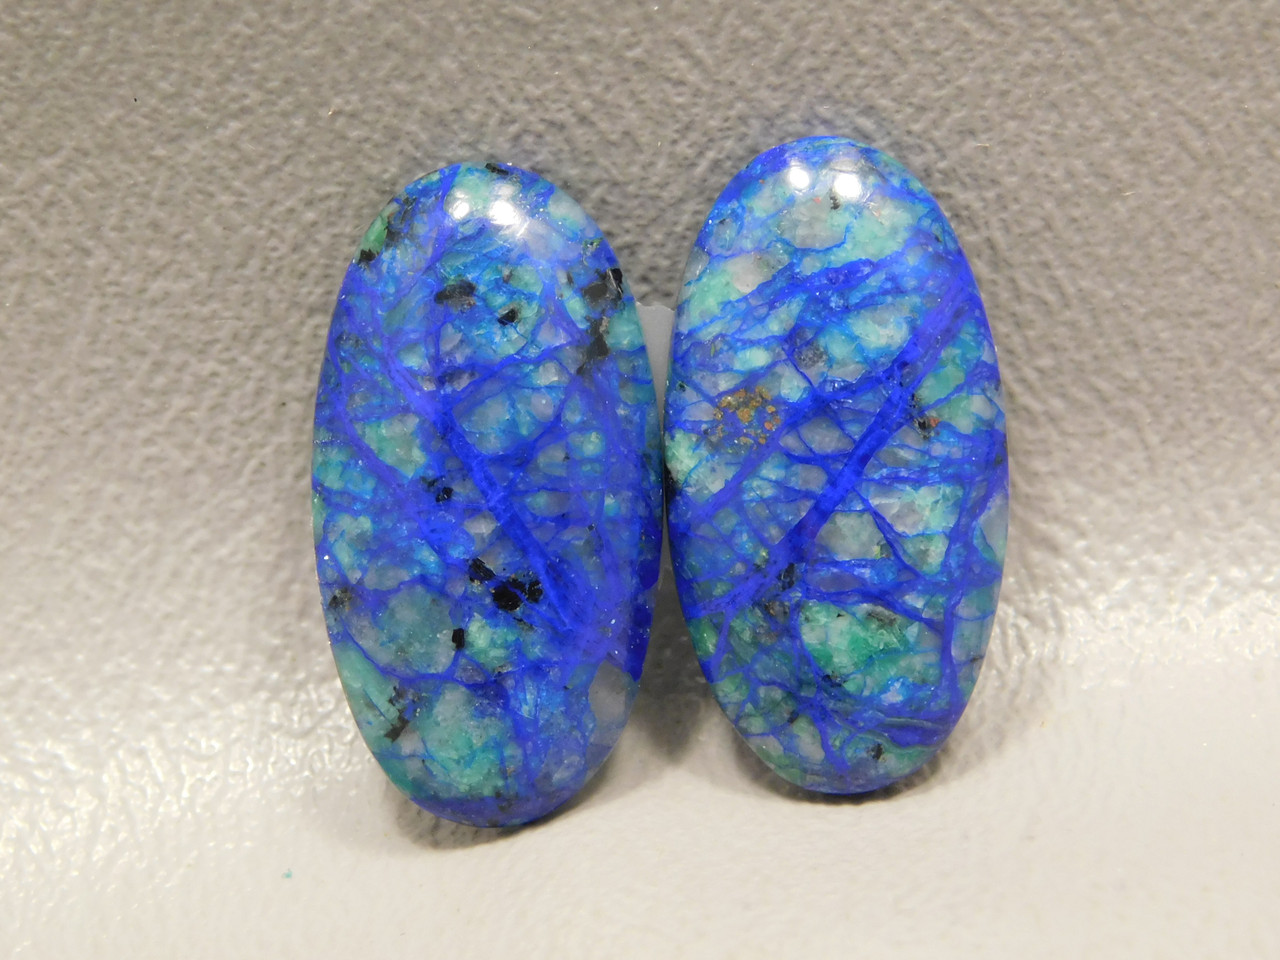 Bluebird Azurite Matched Pairs Ovals Blue Green Stones Cabochons #16